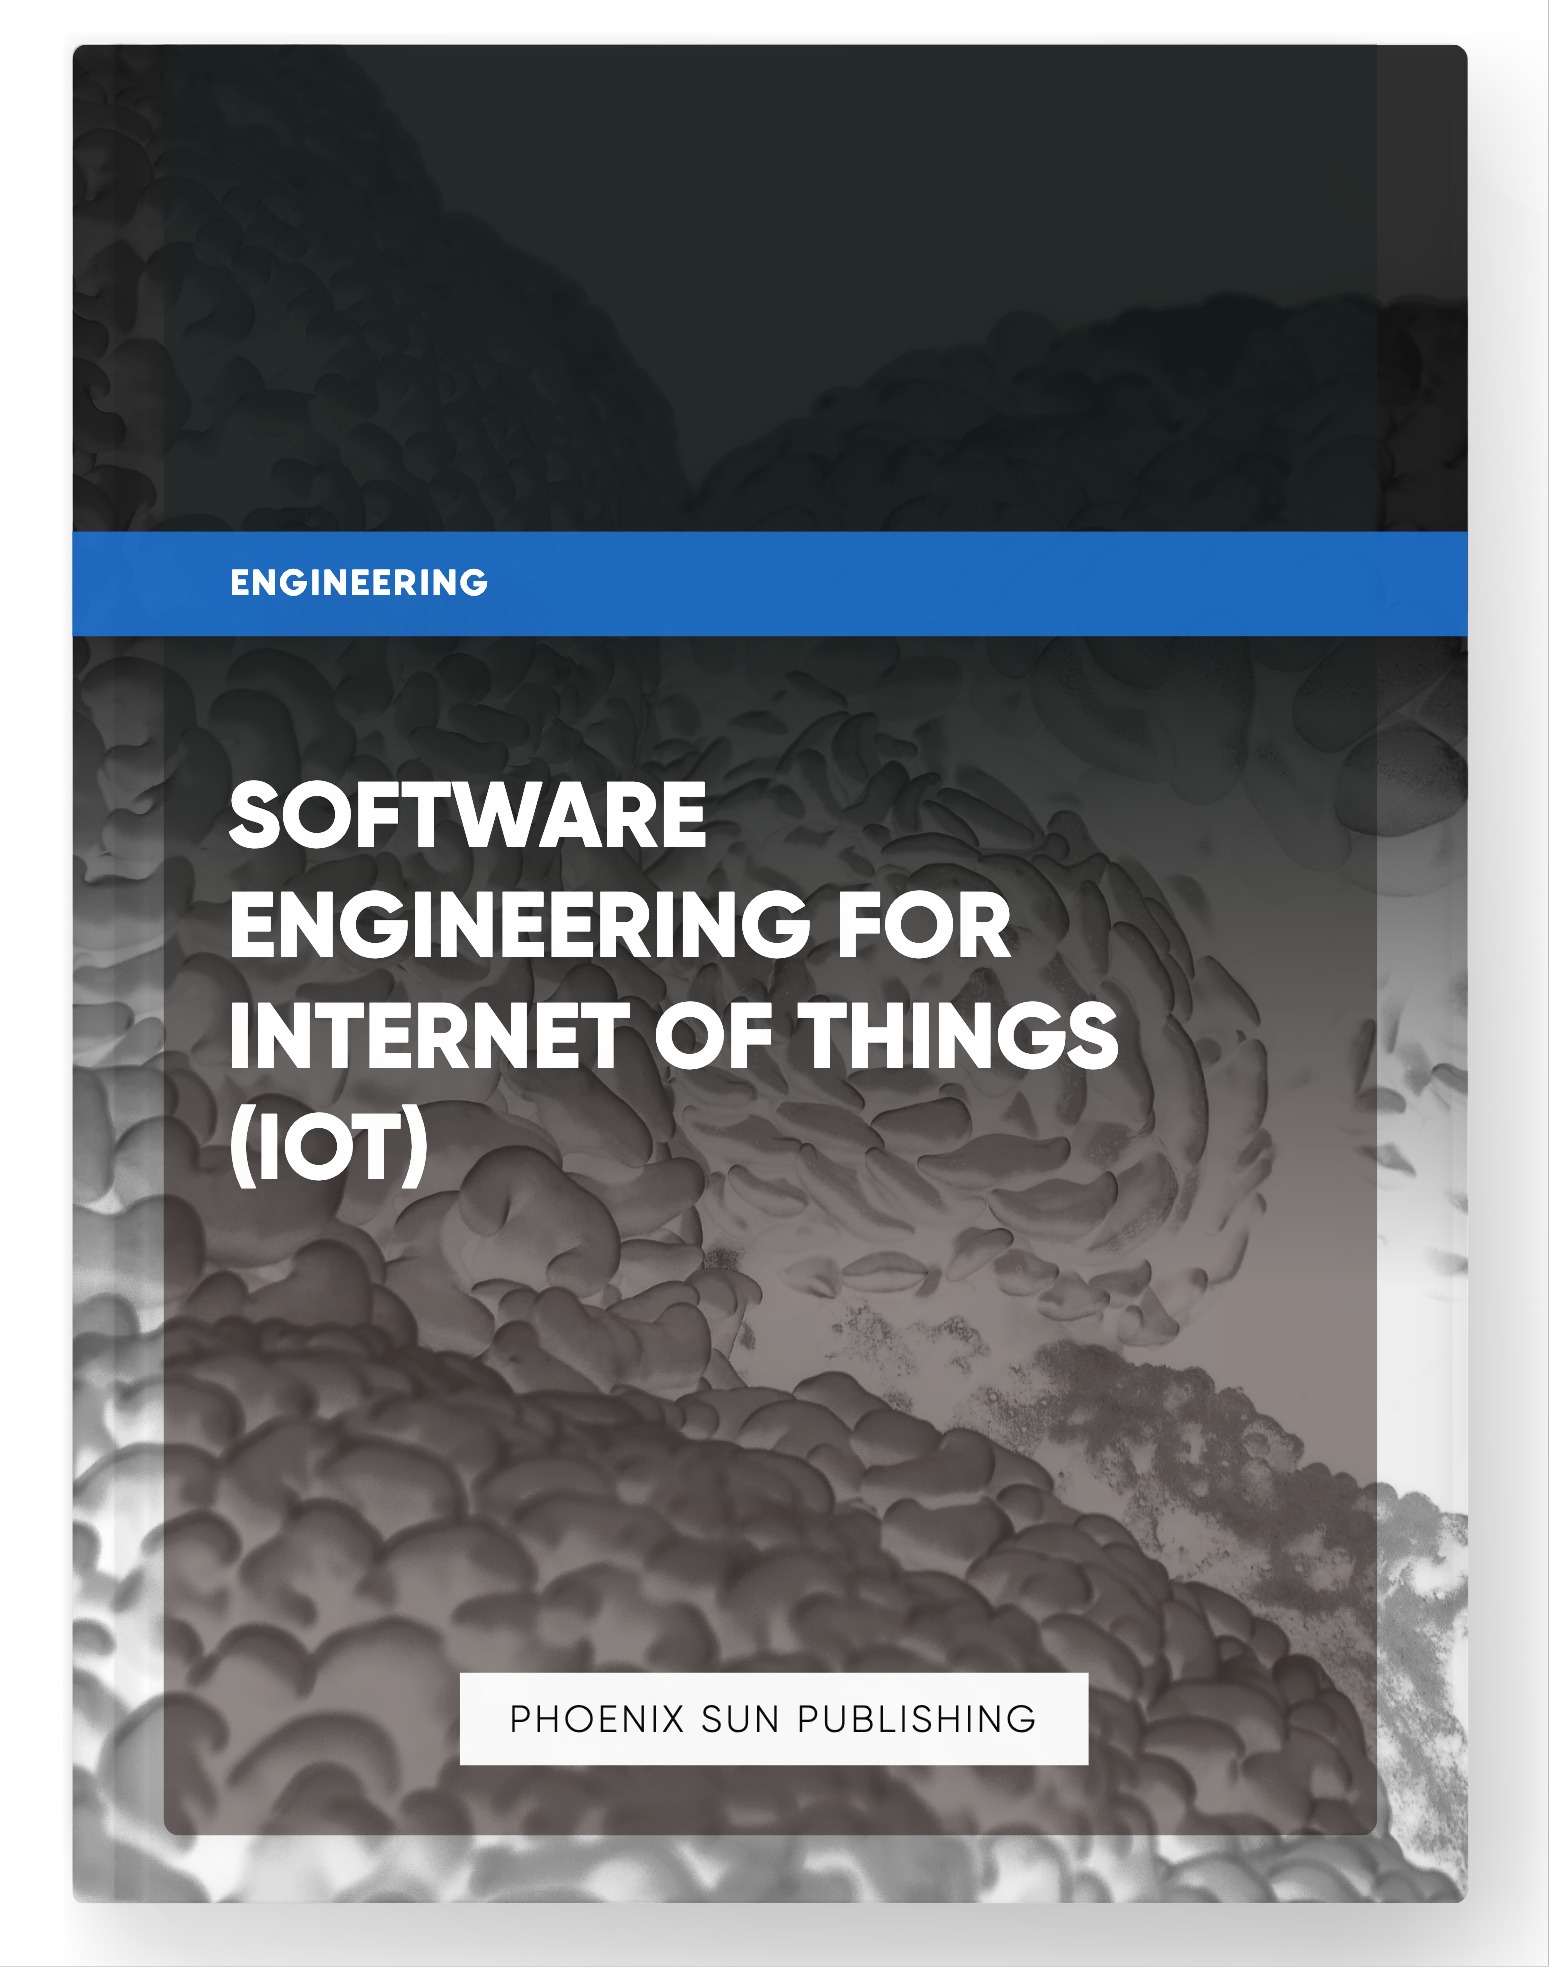 Software Engineering for Internet of Things (IoT)